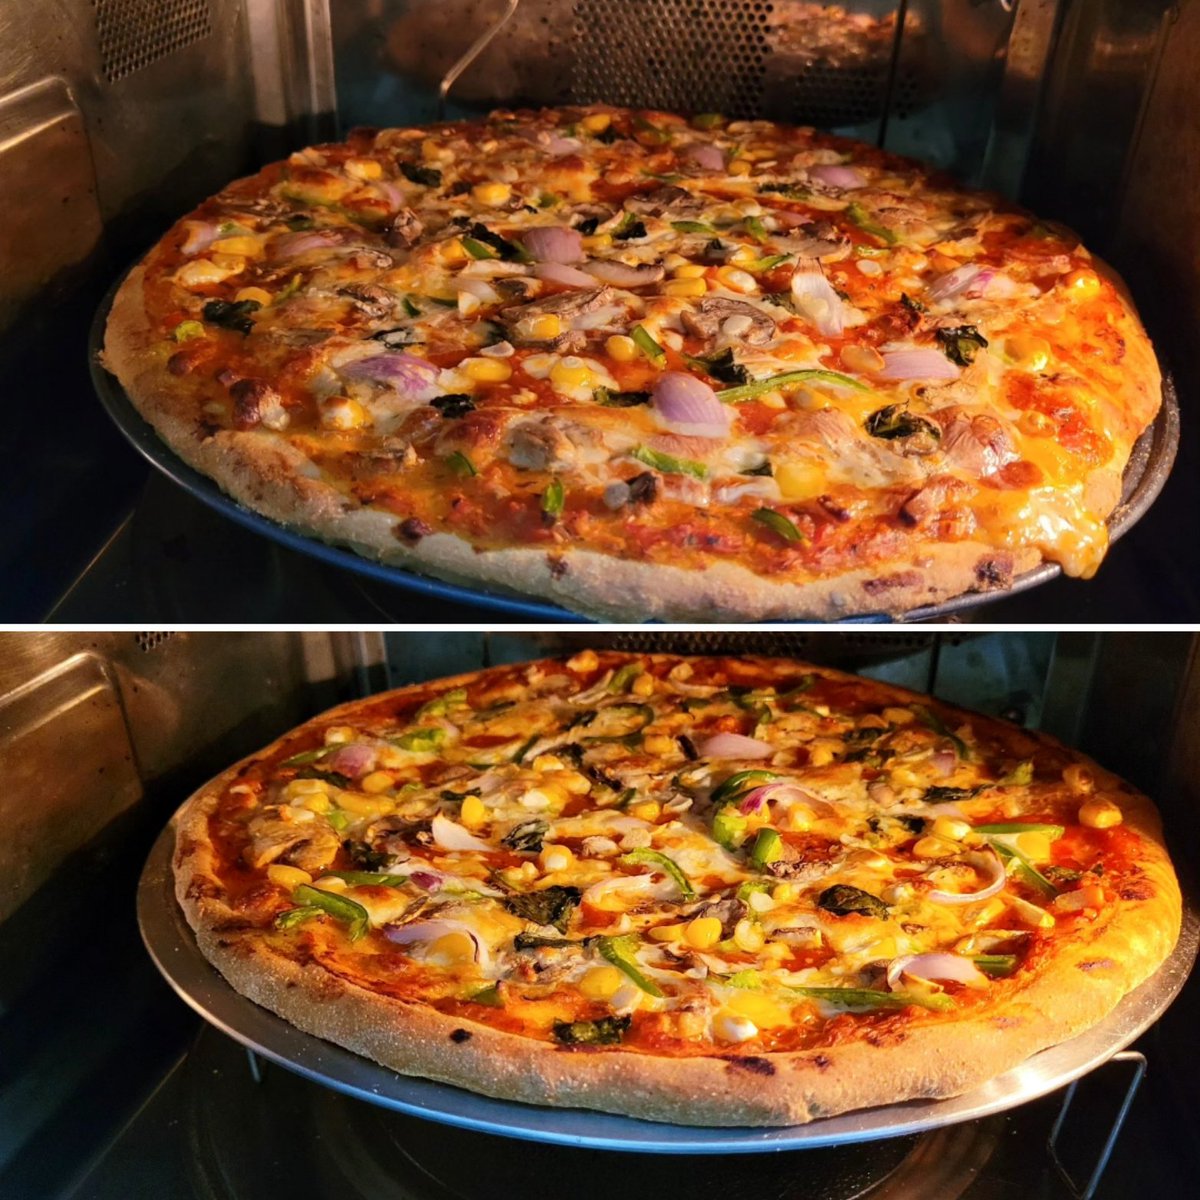 Made two Pizzas for my neices and nephews. 😇🍕🍟🍕🍹🥤🍰
#pizzanight